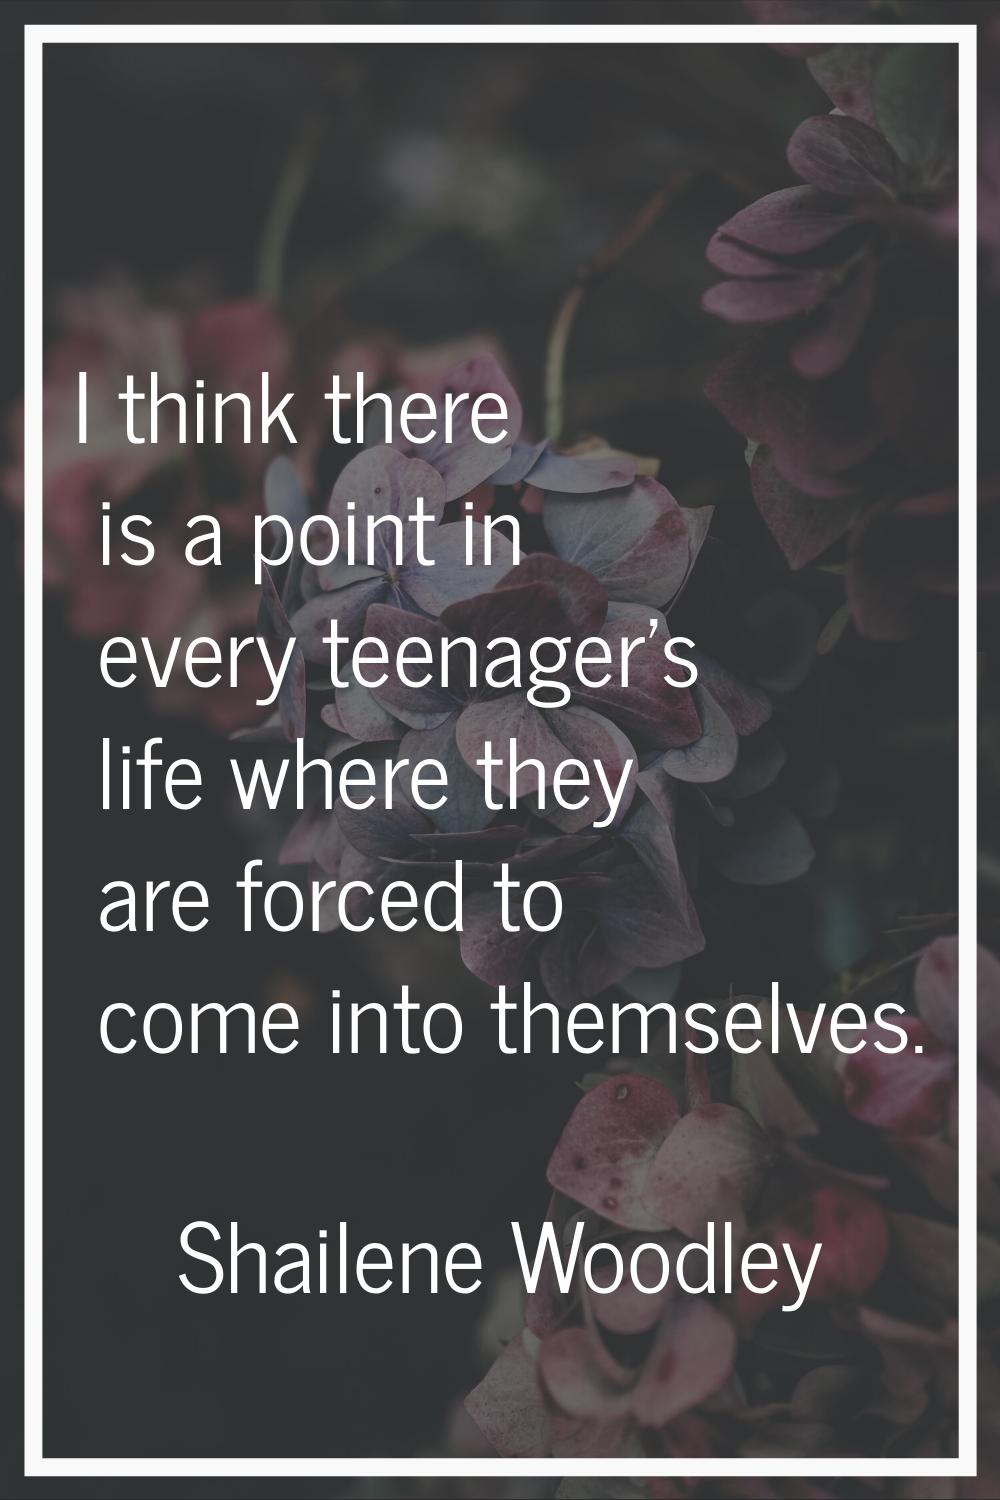 I think there is a point in every teenager's life where they are forced to come into themselves.